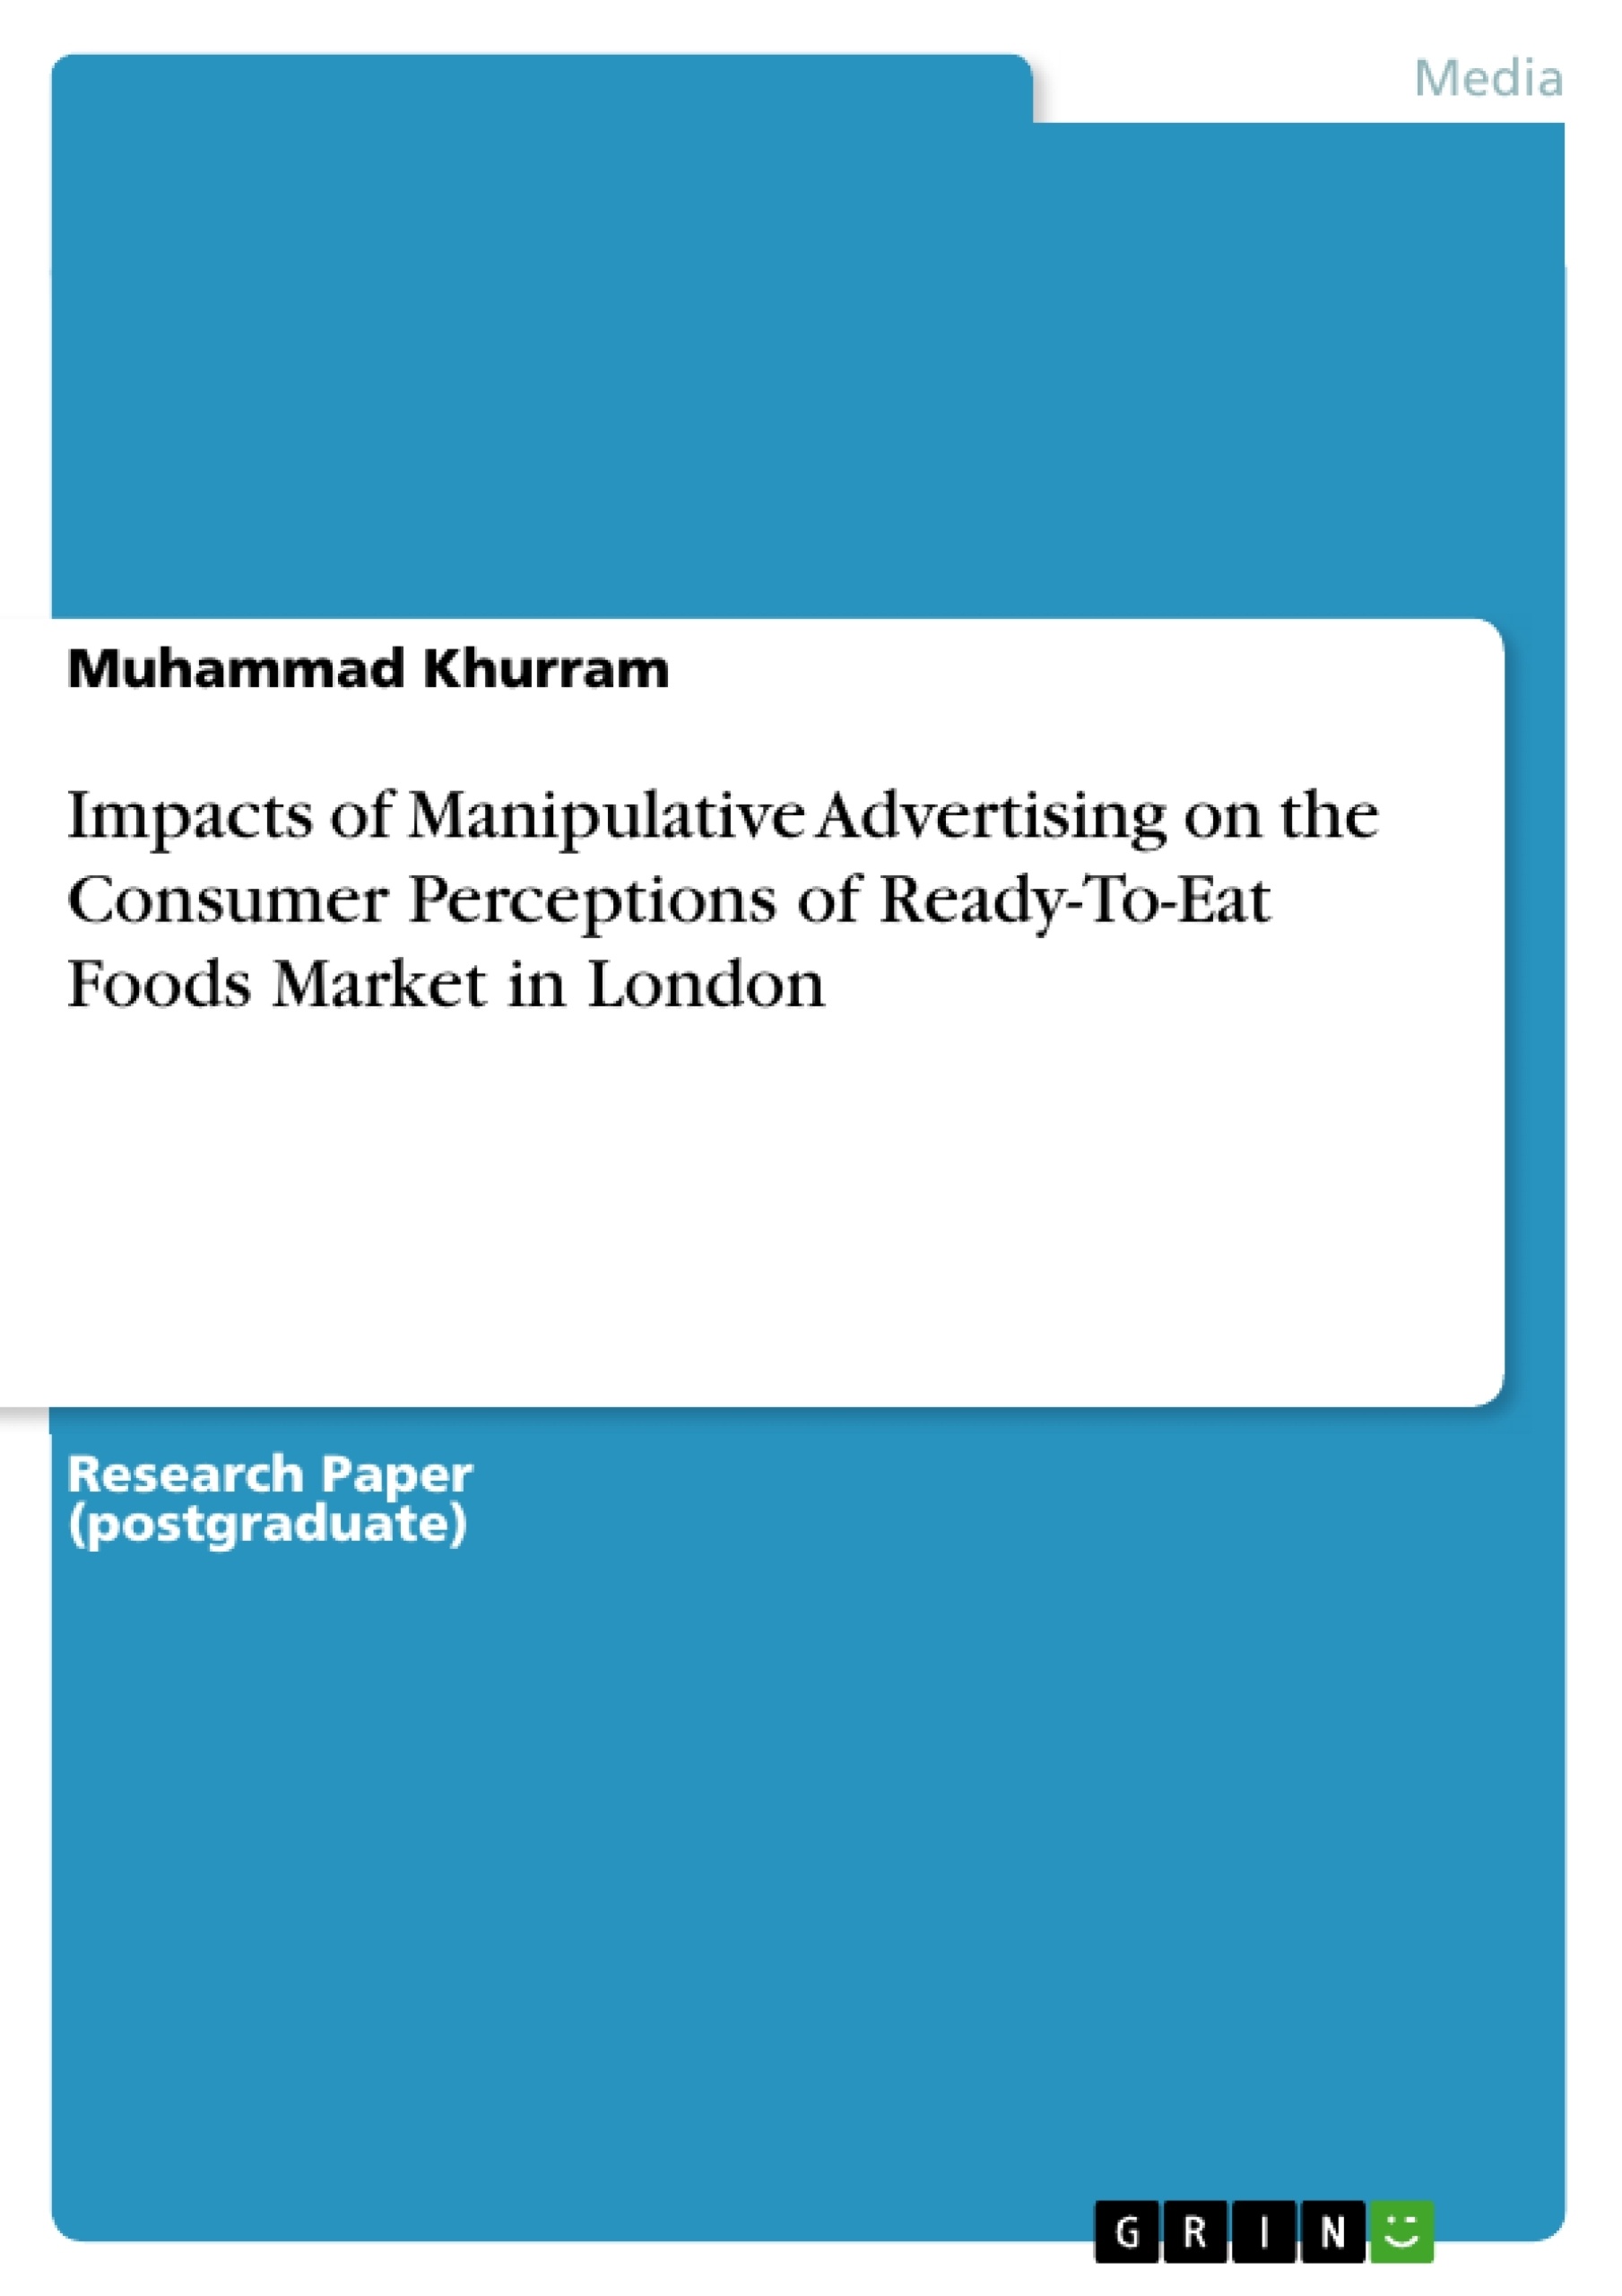 Title: Impacts of Manipulative Advertising on the Consumer Perceptions of Ready-To-Eat Foods Market in London